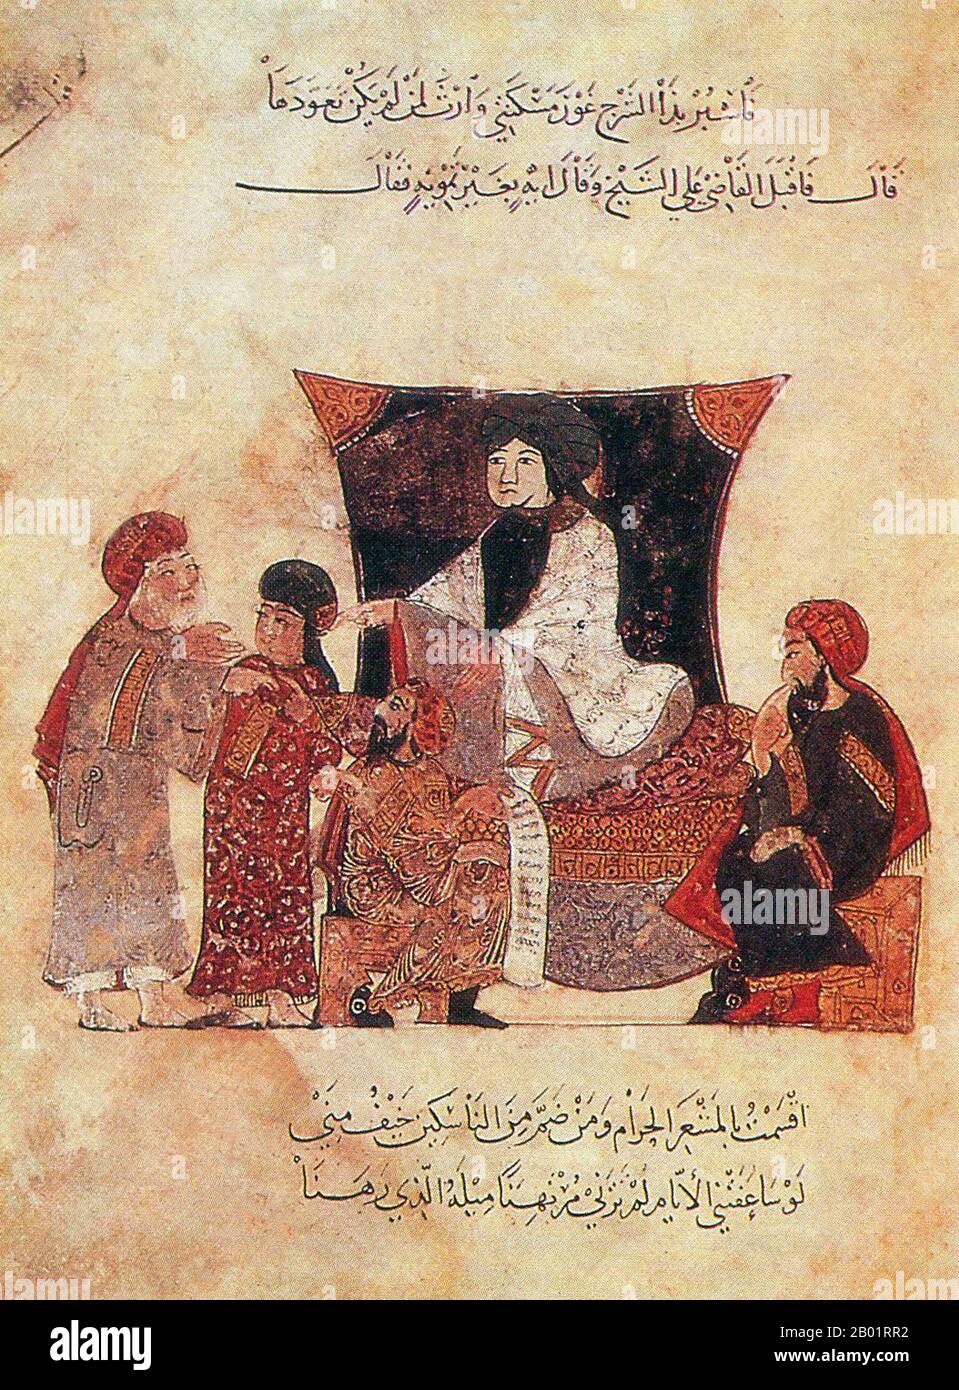 Iraq: An enthroned ruler with his scribe and supplicants. Miniature painting by Yahya ibn Mahmud al-Wasiti, 1237 CE.  Yahyâ ibn Mahmûd al-Wâsitî was a 13th-century Arab Islamic artist. Al-Wasiti was born in Wasit in southern Iraq. He was noted for his illustrations of the Maqam of al-Hariri.  Maqāma (literally 'assemblies') are an (originally) Arabic literary genre of rhymed prose with intervals of poetry in which rhetorical extravagance is conspicuous. The 10th century author Badī' al-Zaman al-Hamadhāni is said to have invented the form, which was extended by al-Hariri of Basra. Stock Photo